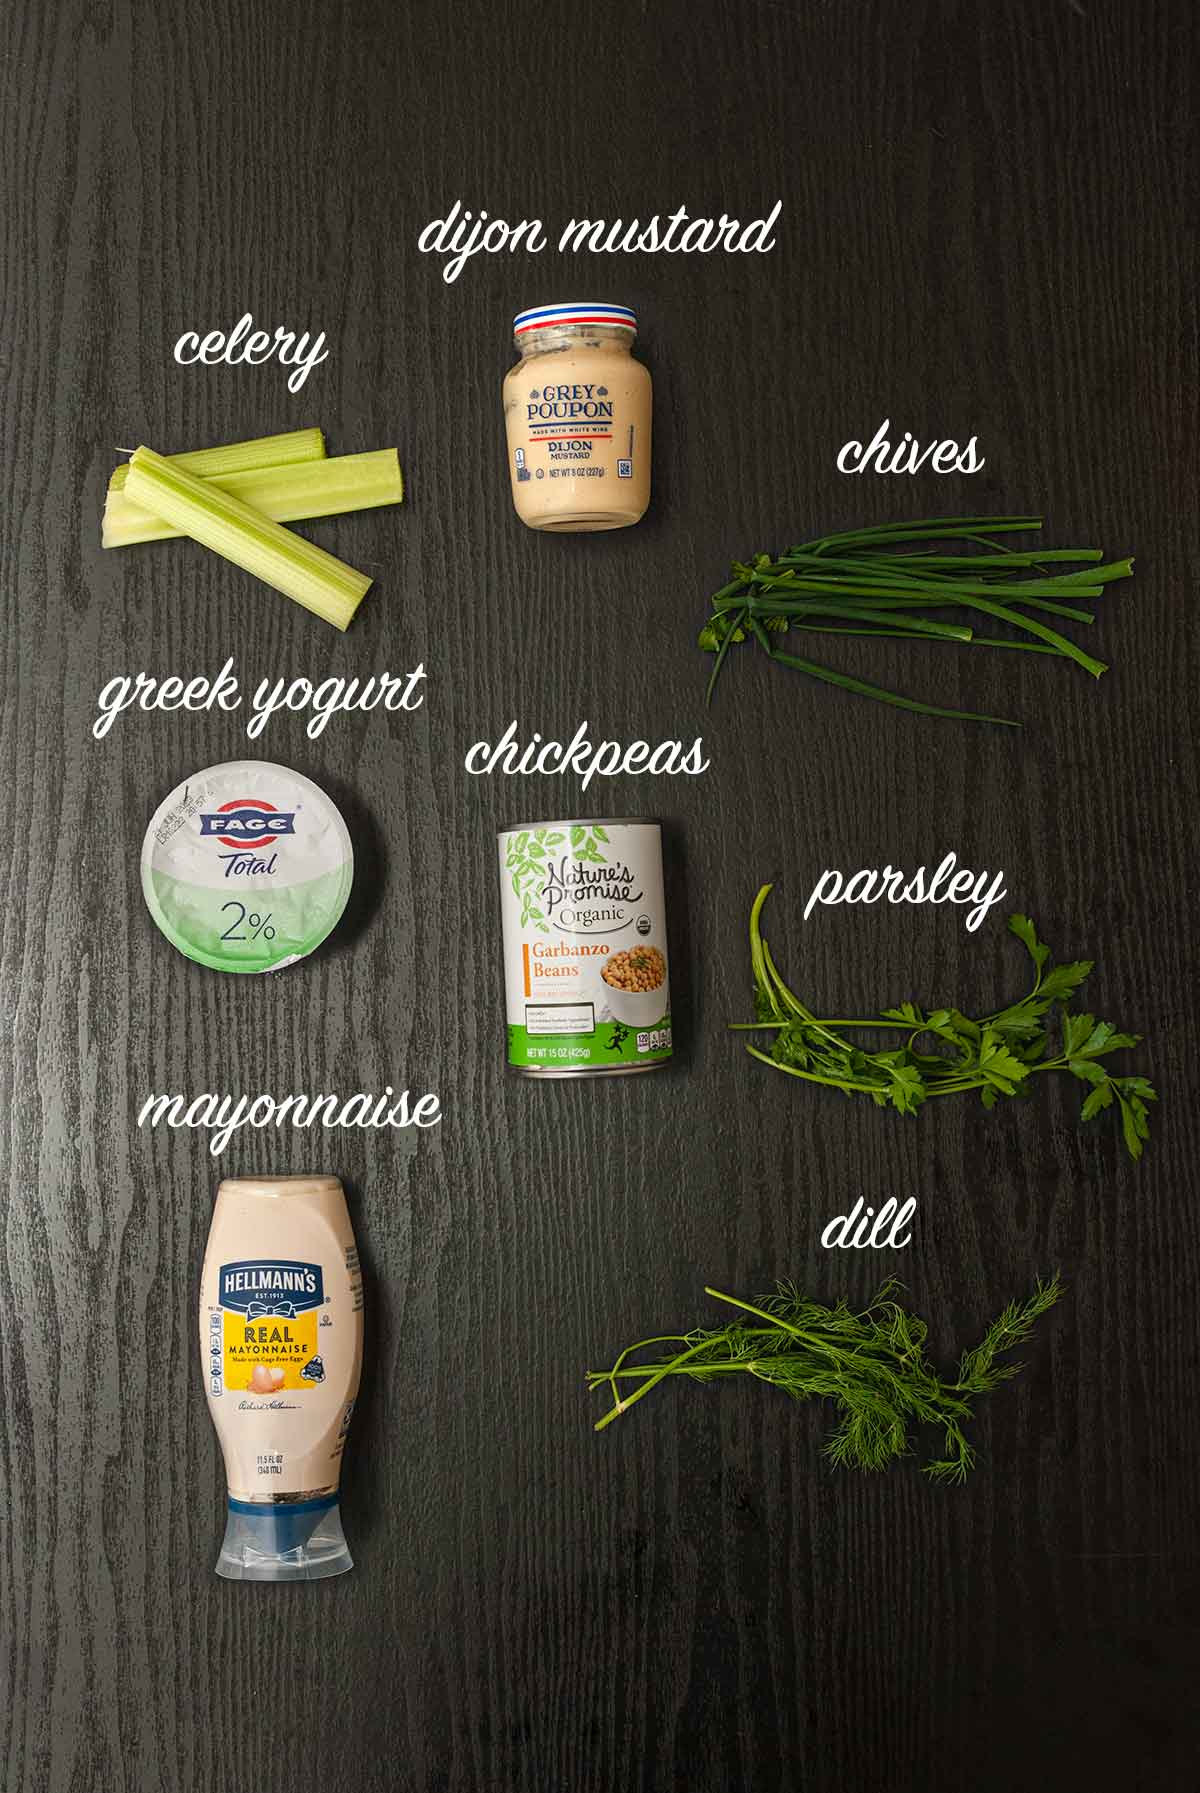 8 ingredients on a table with labels describing what they are.